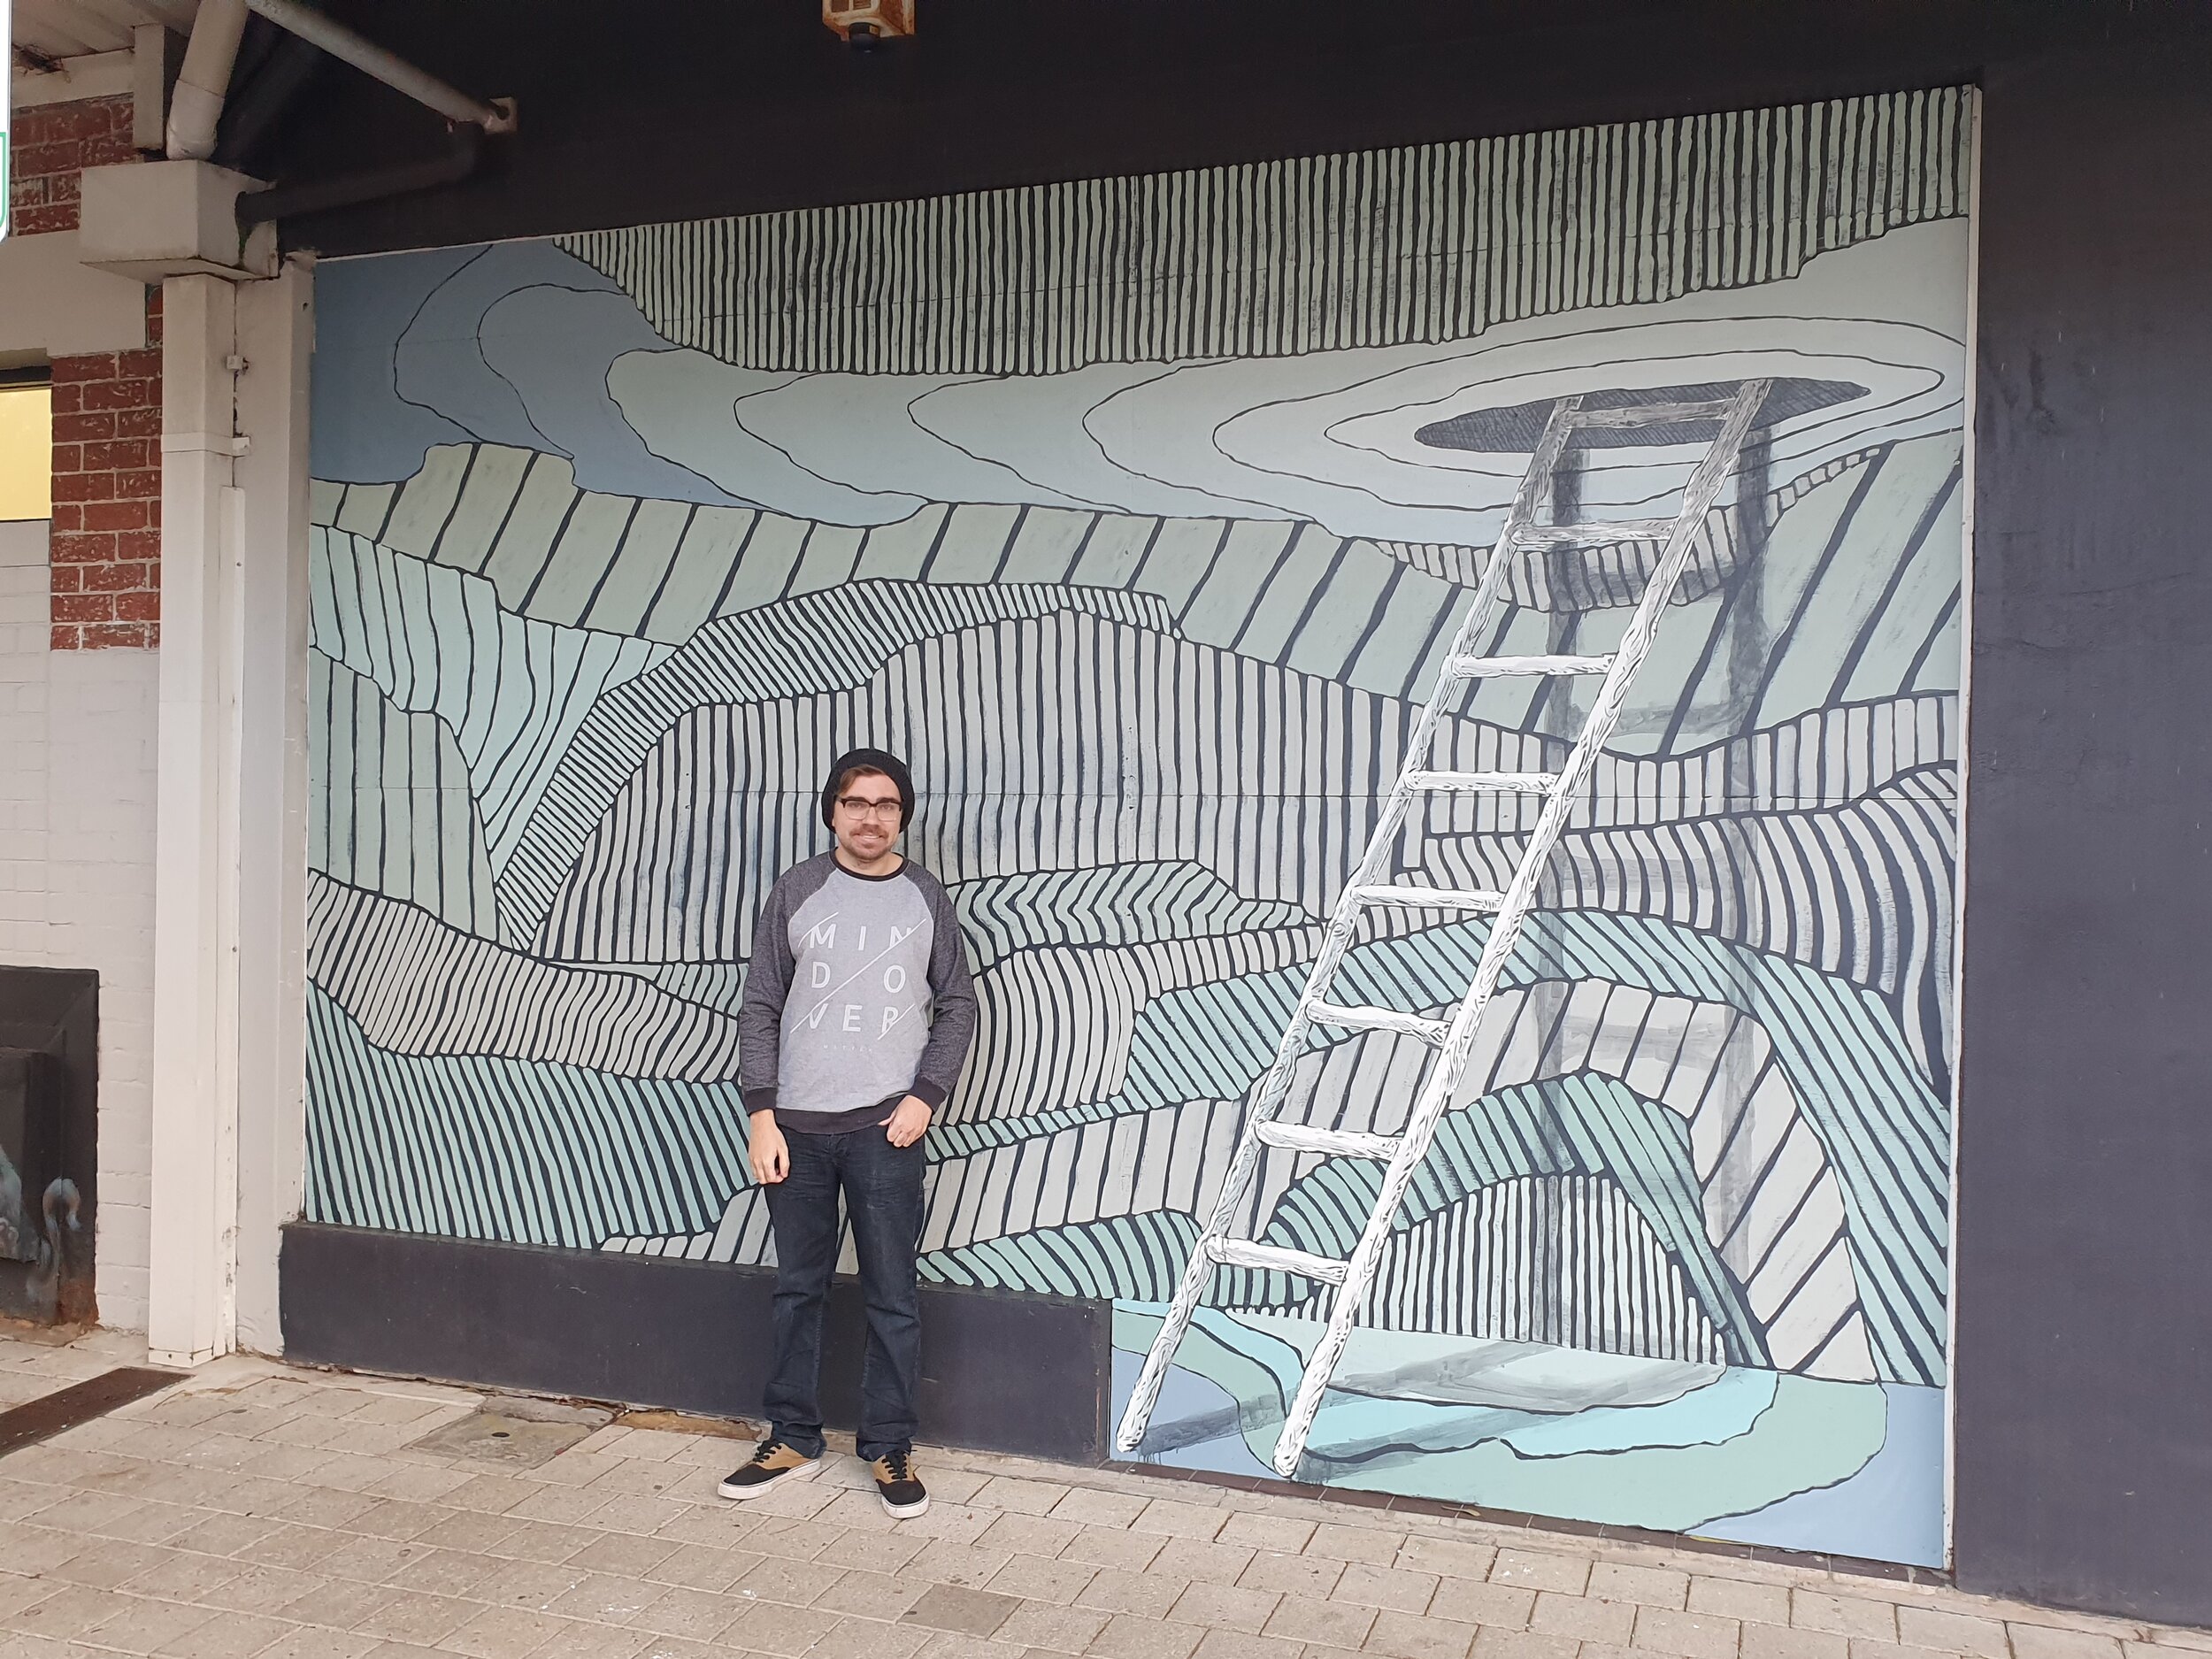 Dylan Nietzreba worked with guidance of his mentor, Andrew Frazer, on a mural in Bunbury